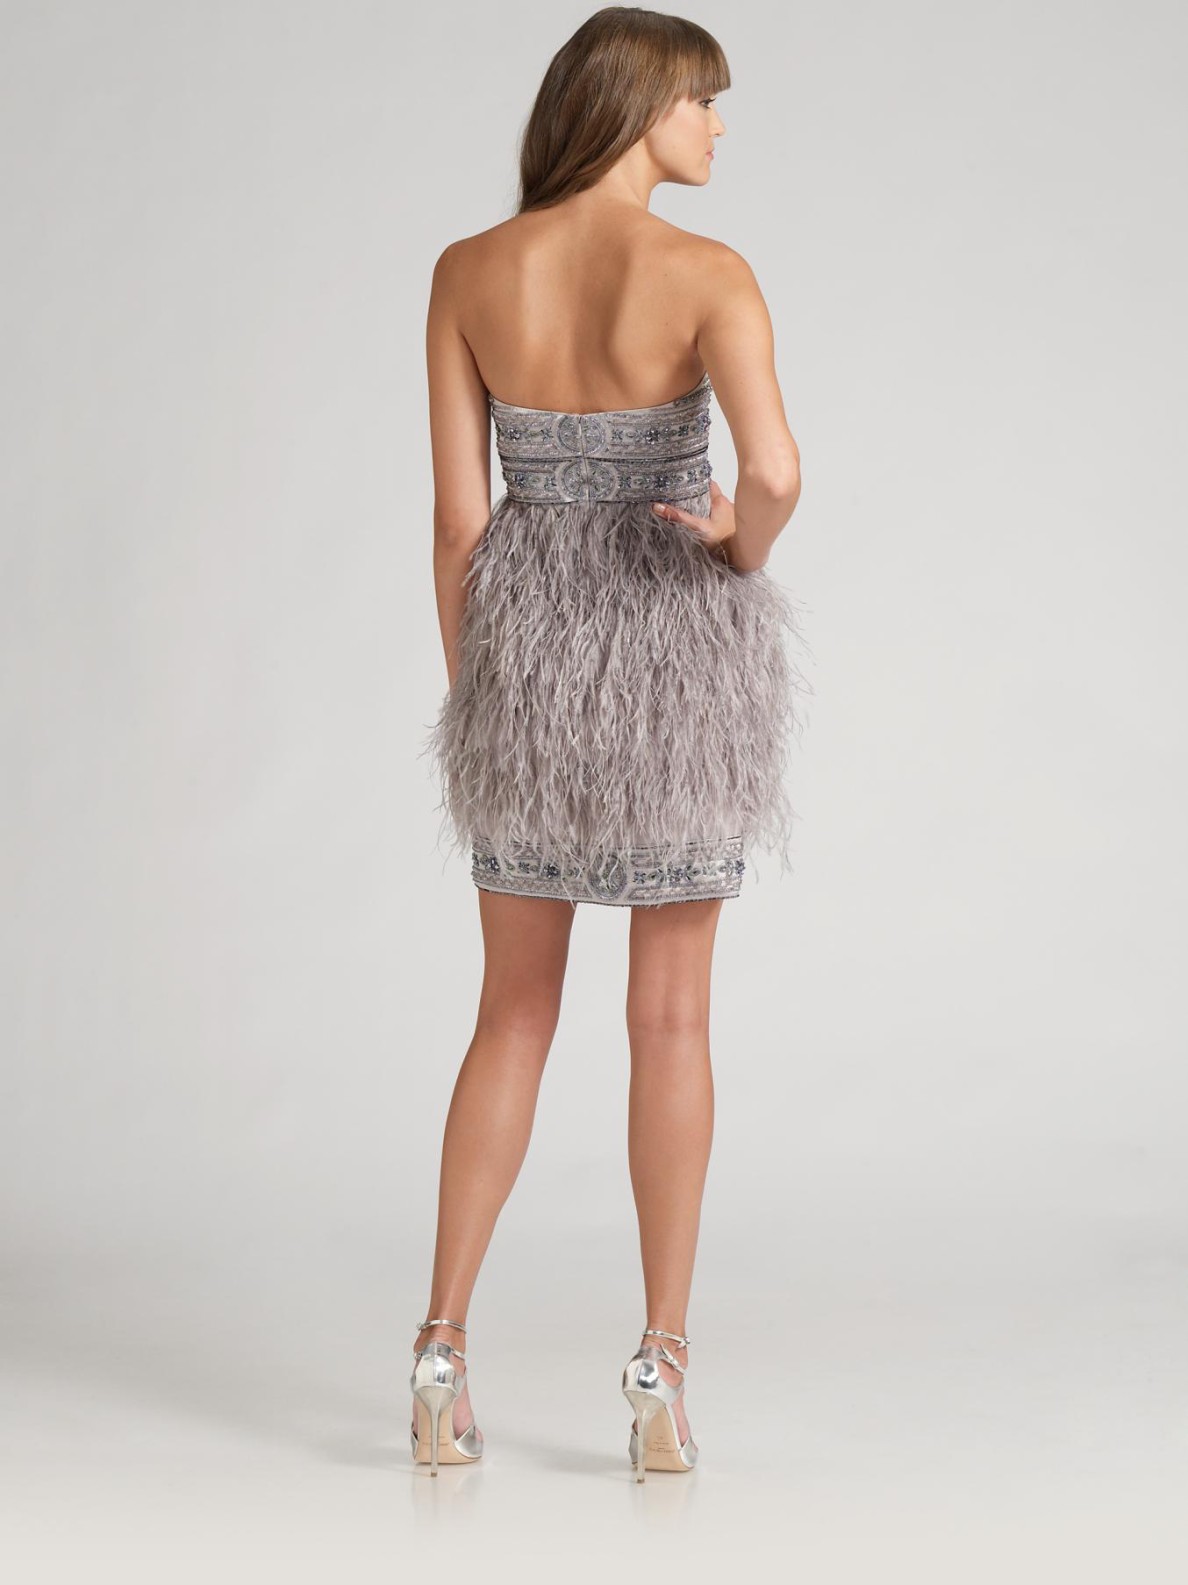 Lyst - Sue Wong Feathered Cocktail Dress in Gray